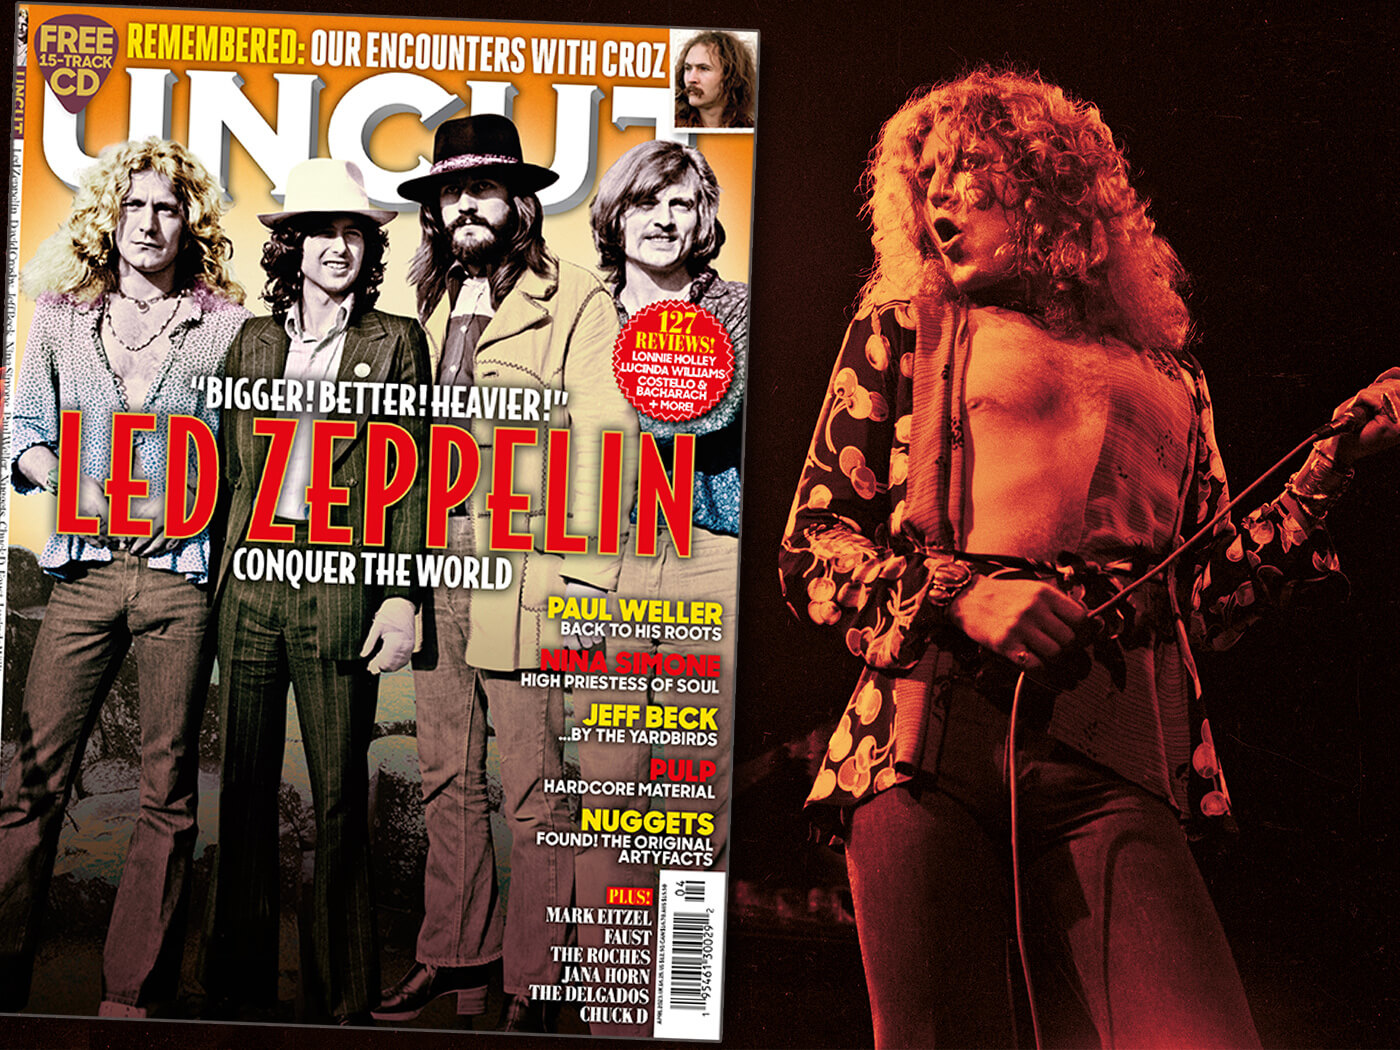 Revisiting Led Zeppelin's meteoric rise to the top in 1973